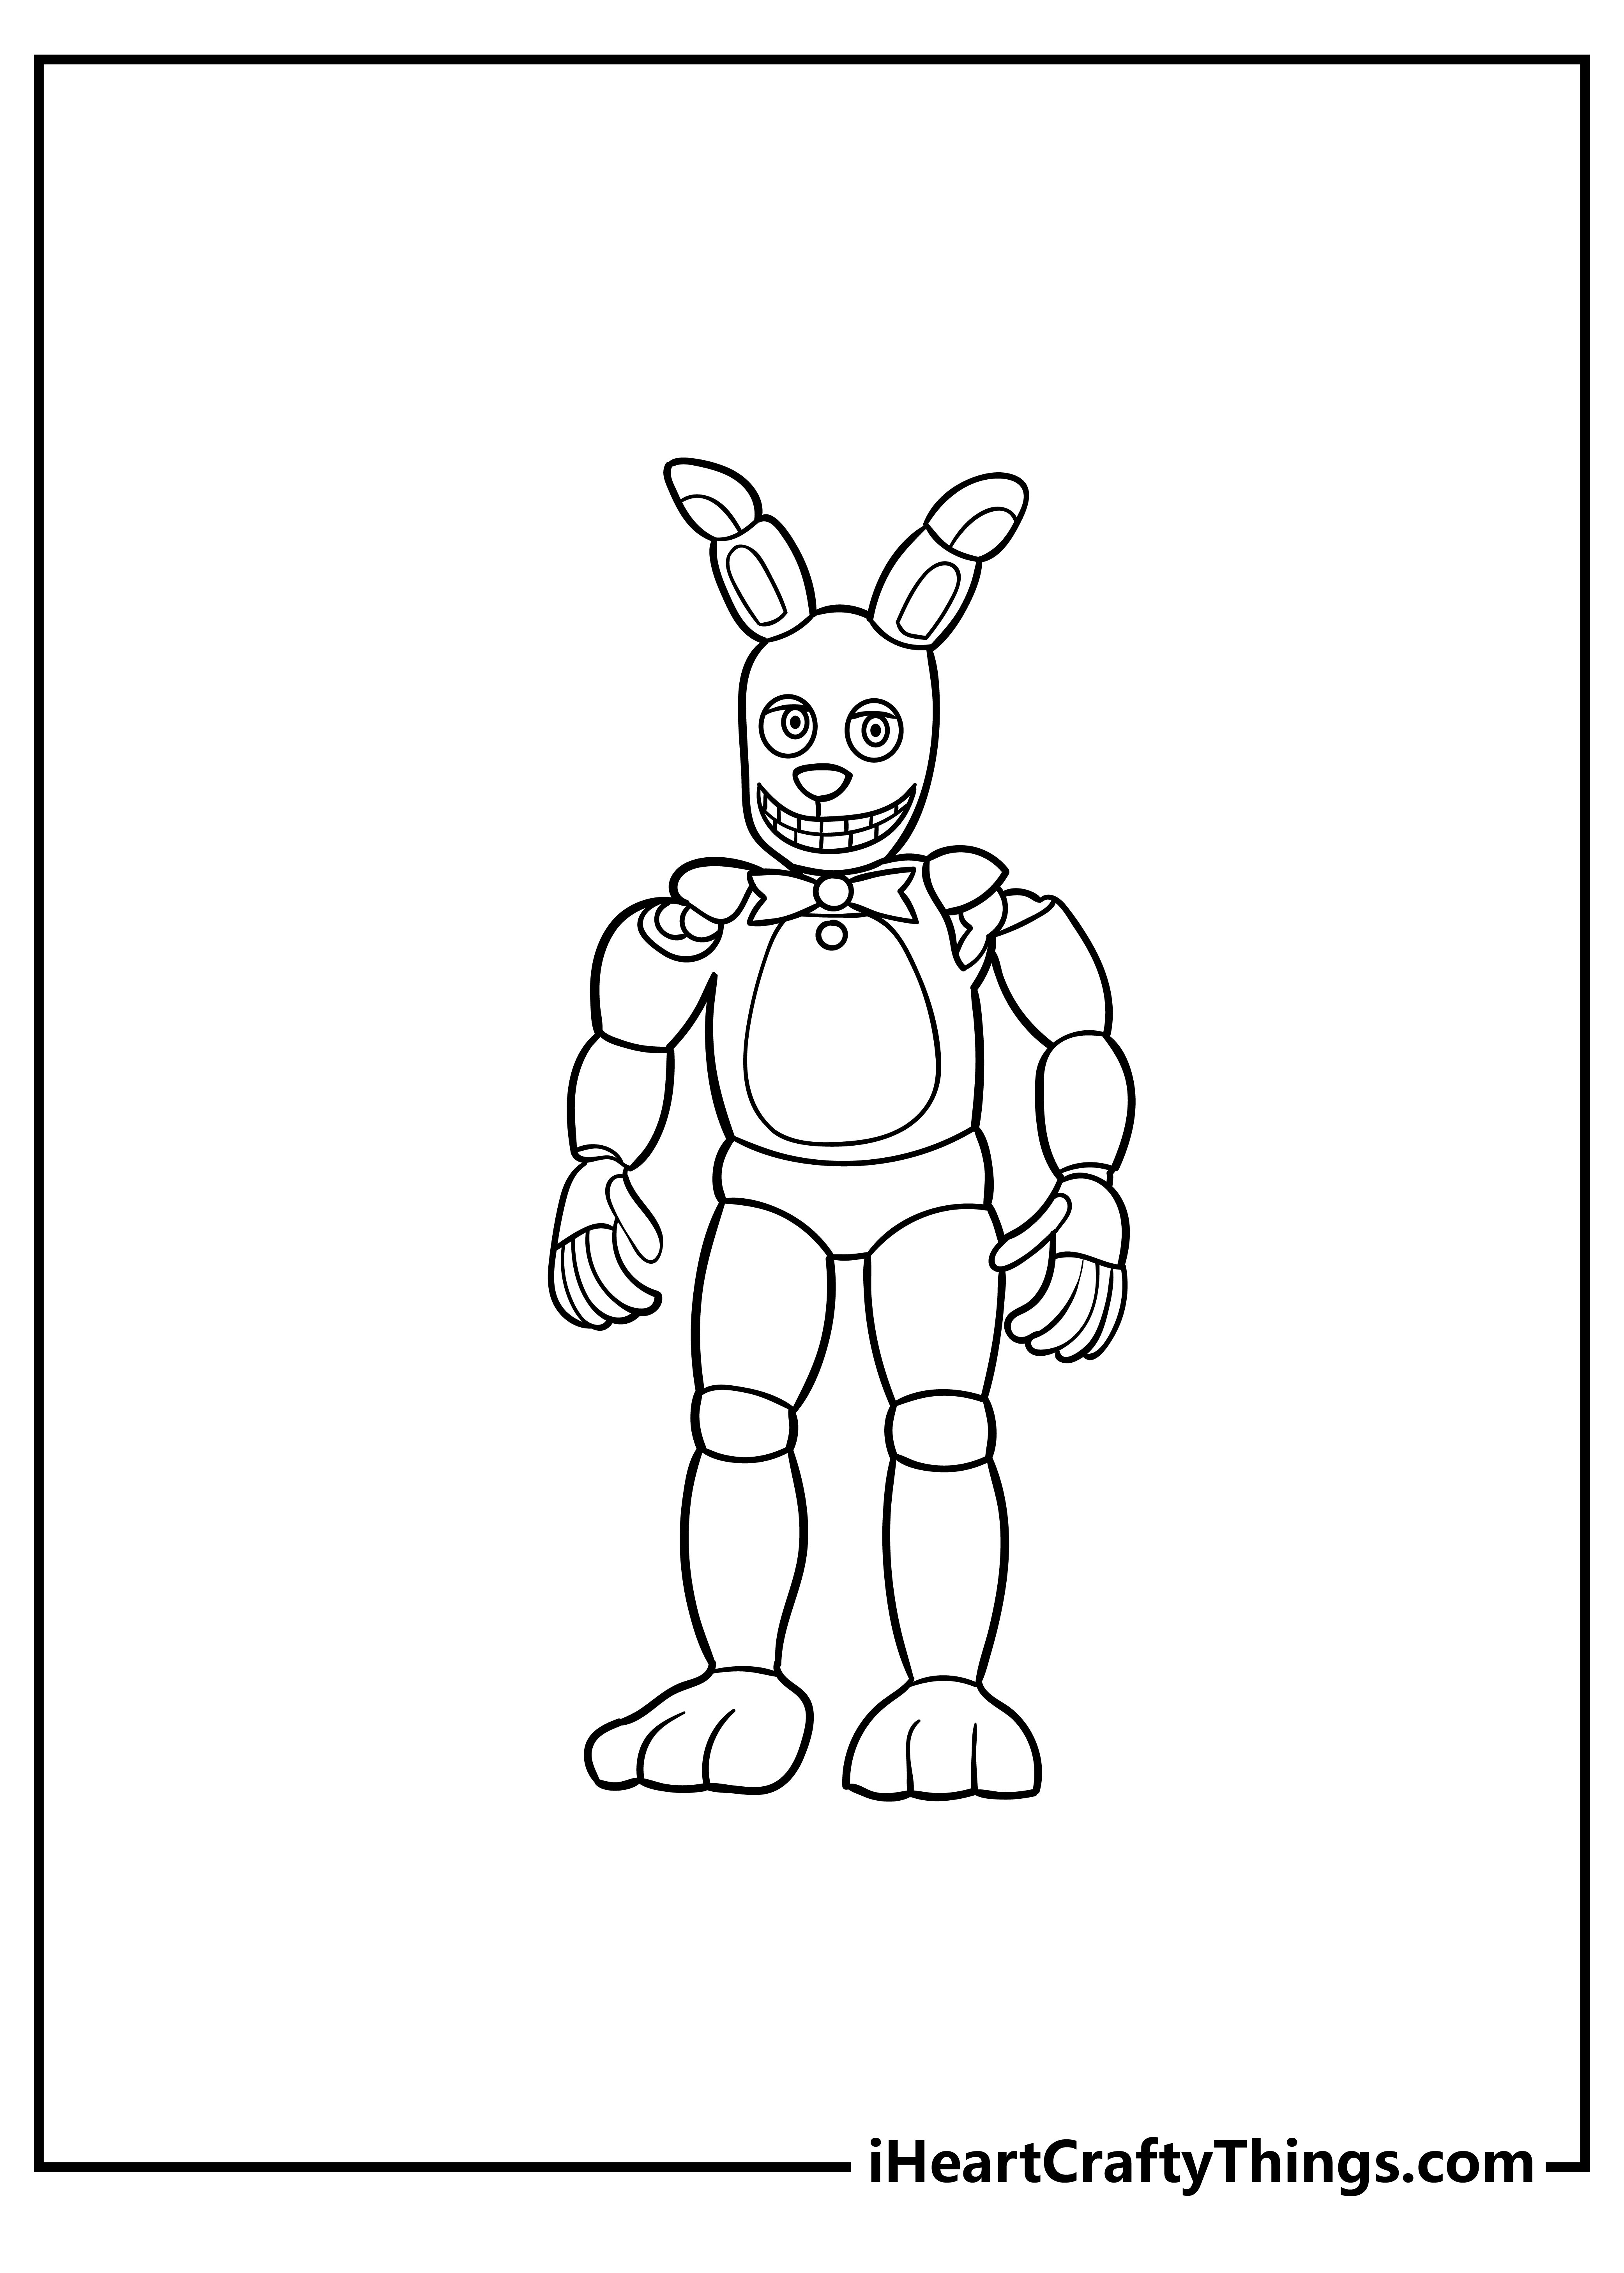 Five Nights At Freddy’s Coloring Book free printable